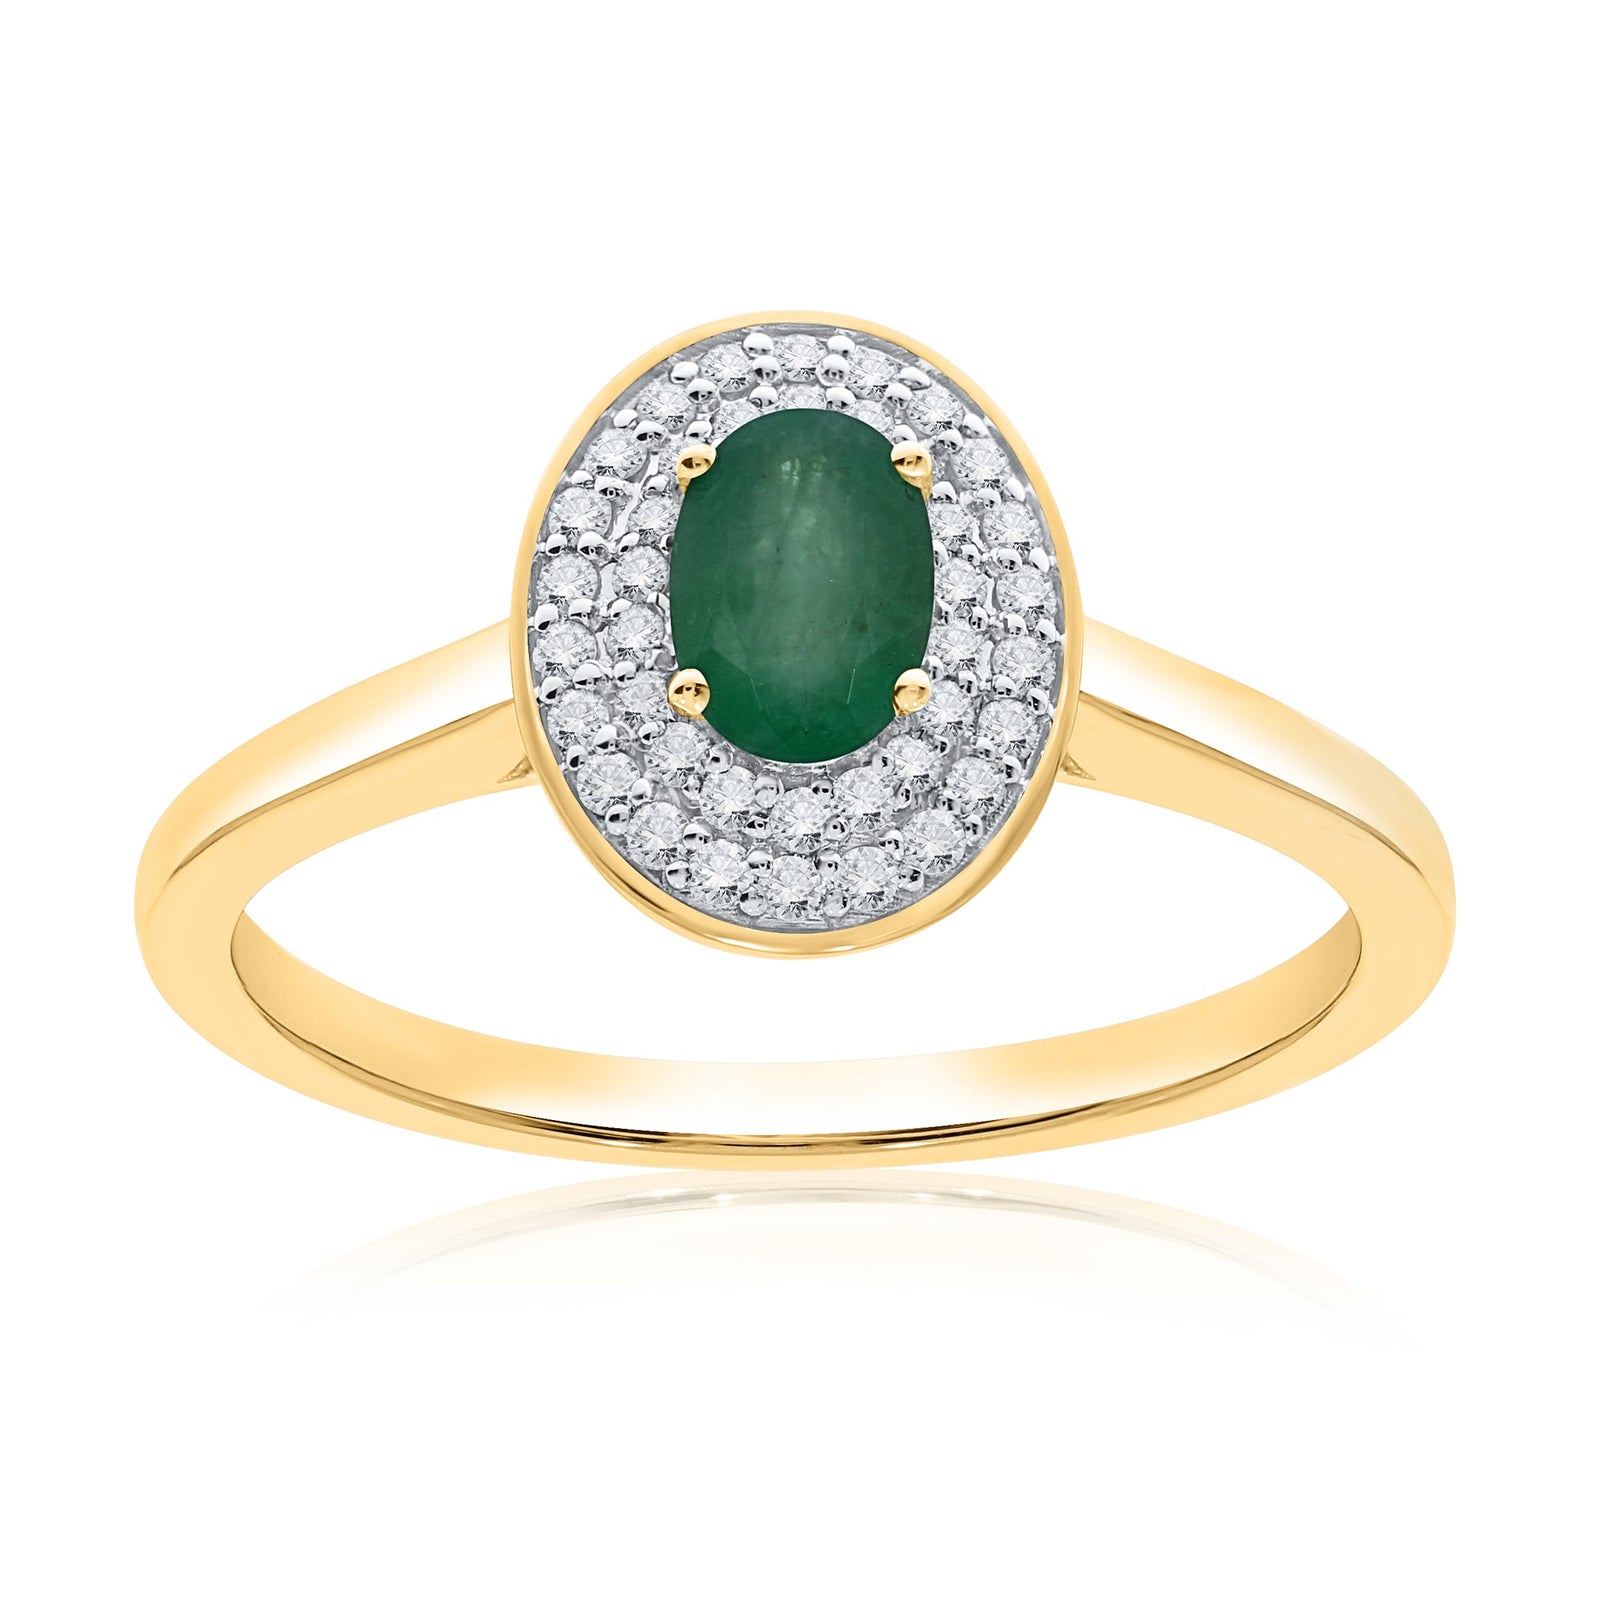 9ct gold 6x4mm oval emerald & two row diamond cluster ring 0.20ct